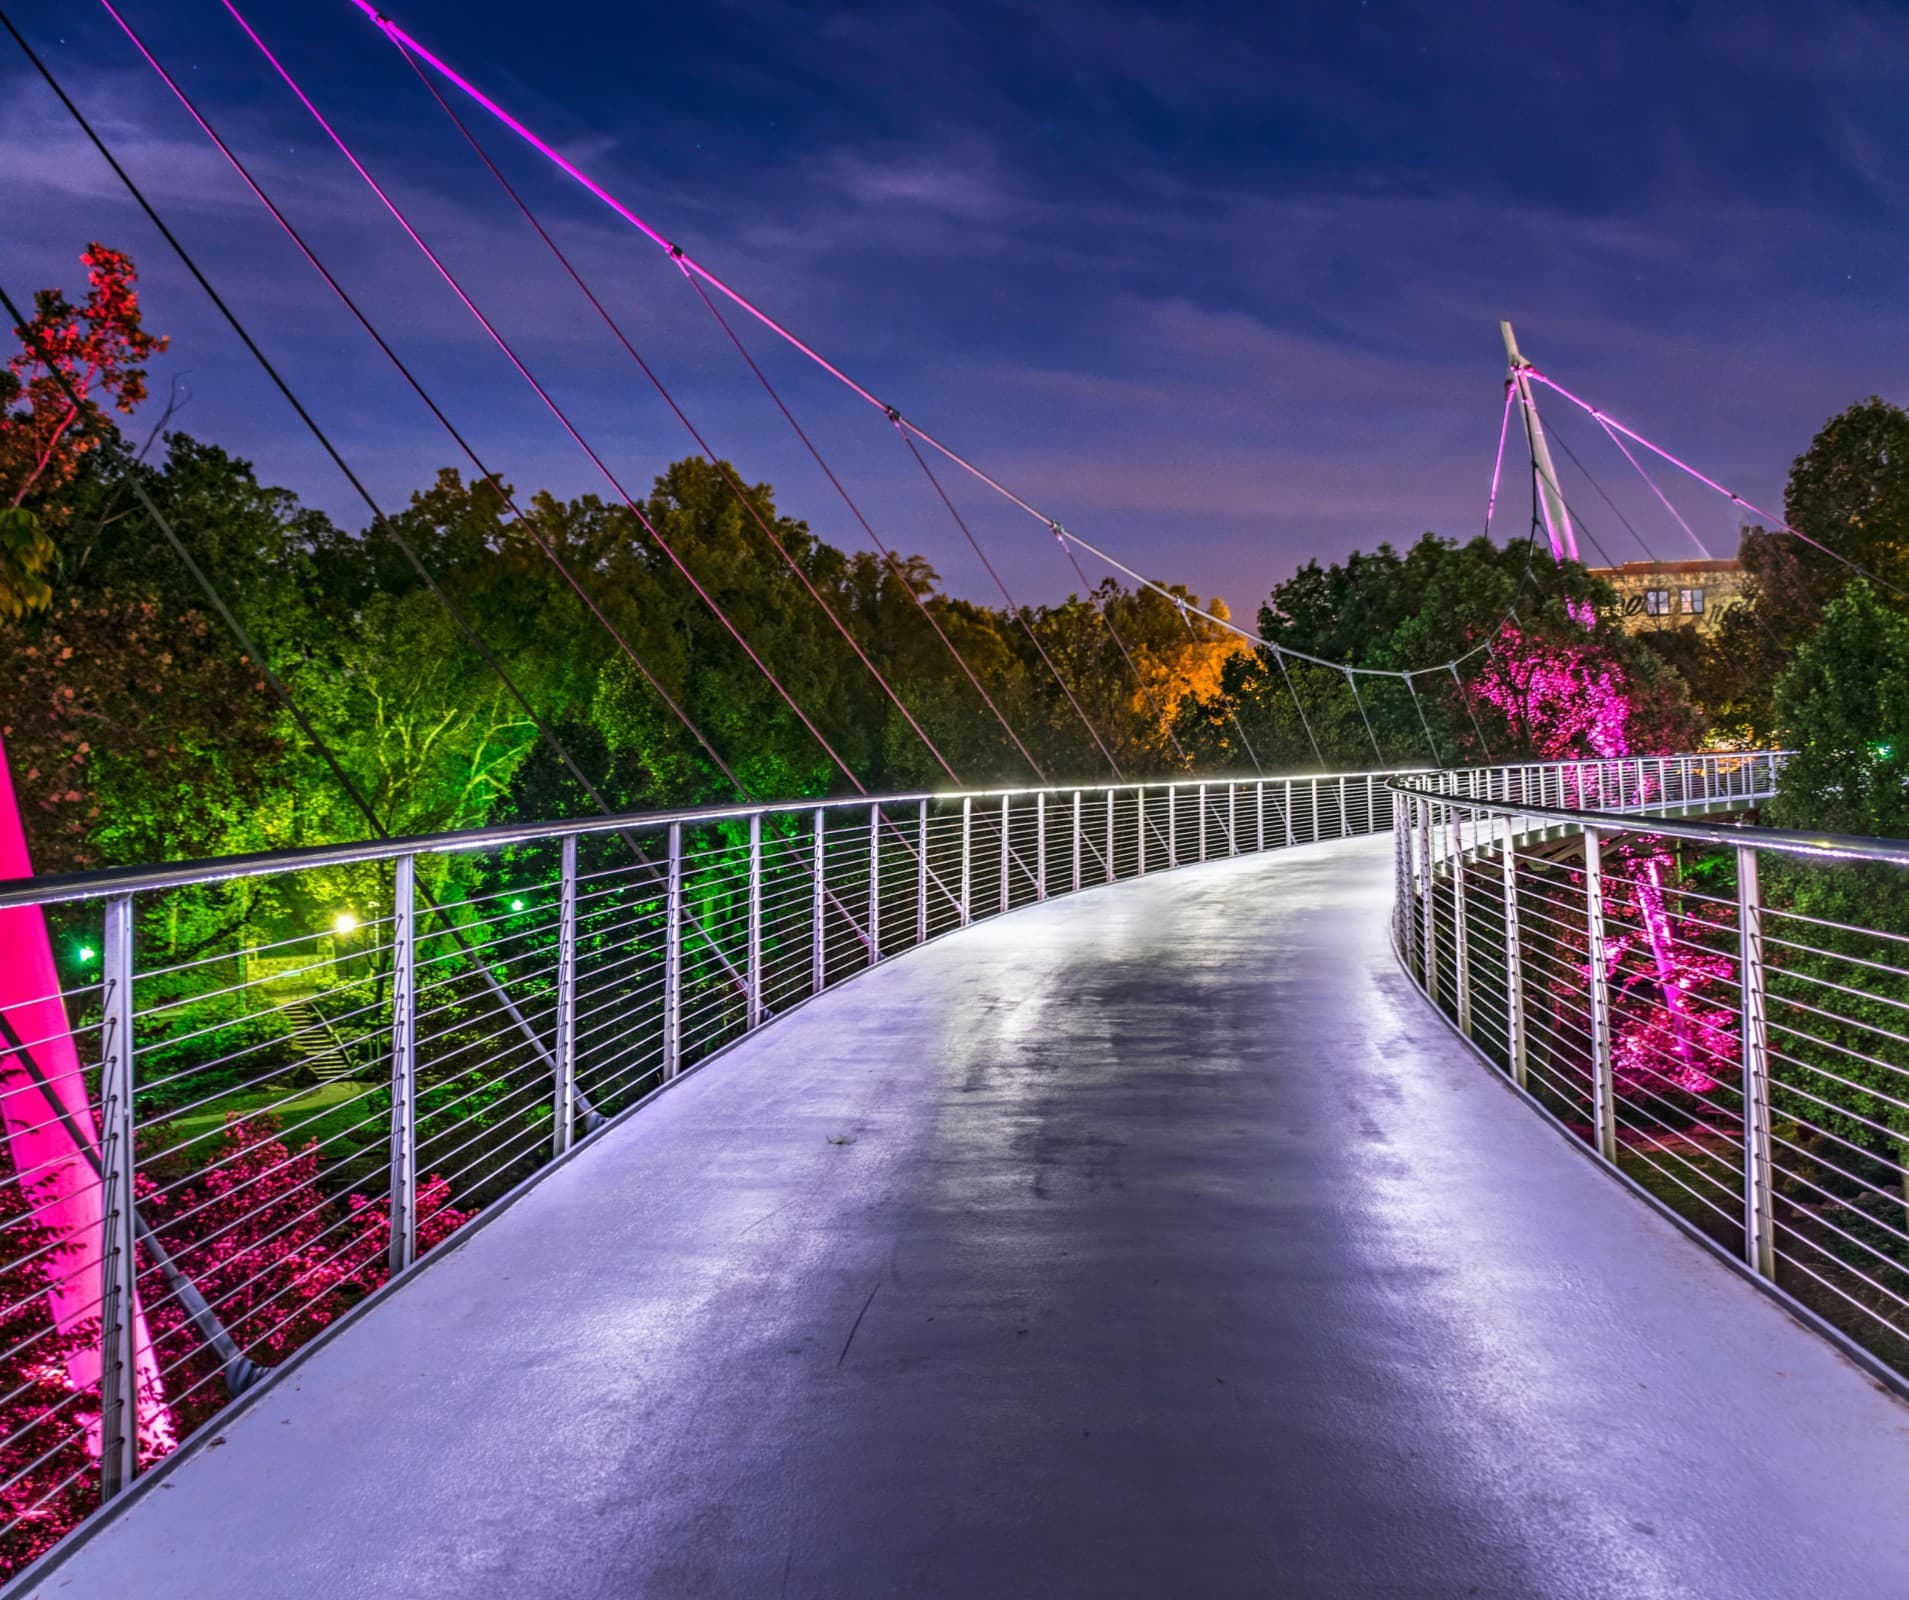 Greenville, SC Named the #1 Friendliest City in the U.S. by Condé Nast Traveler